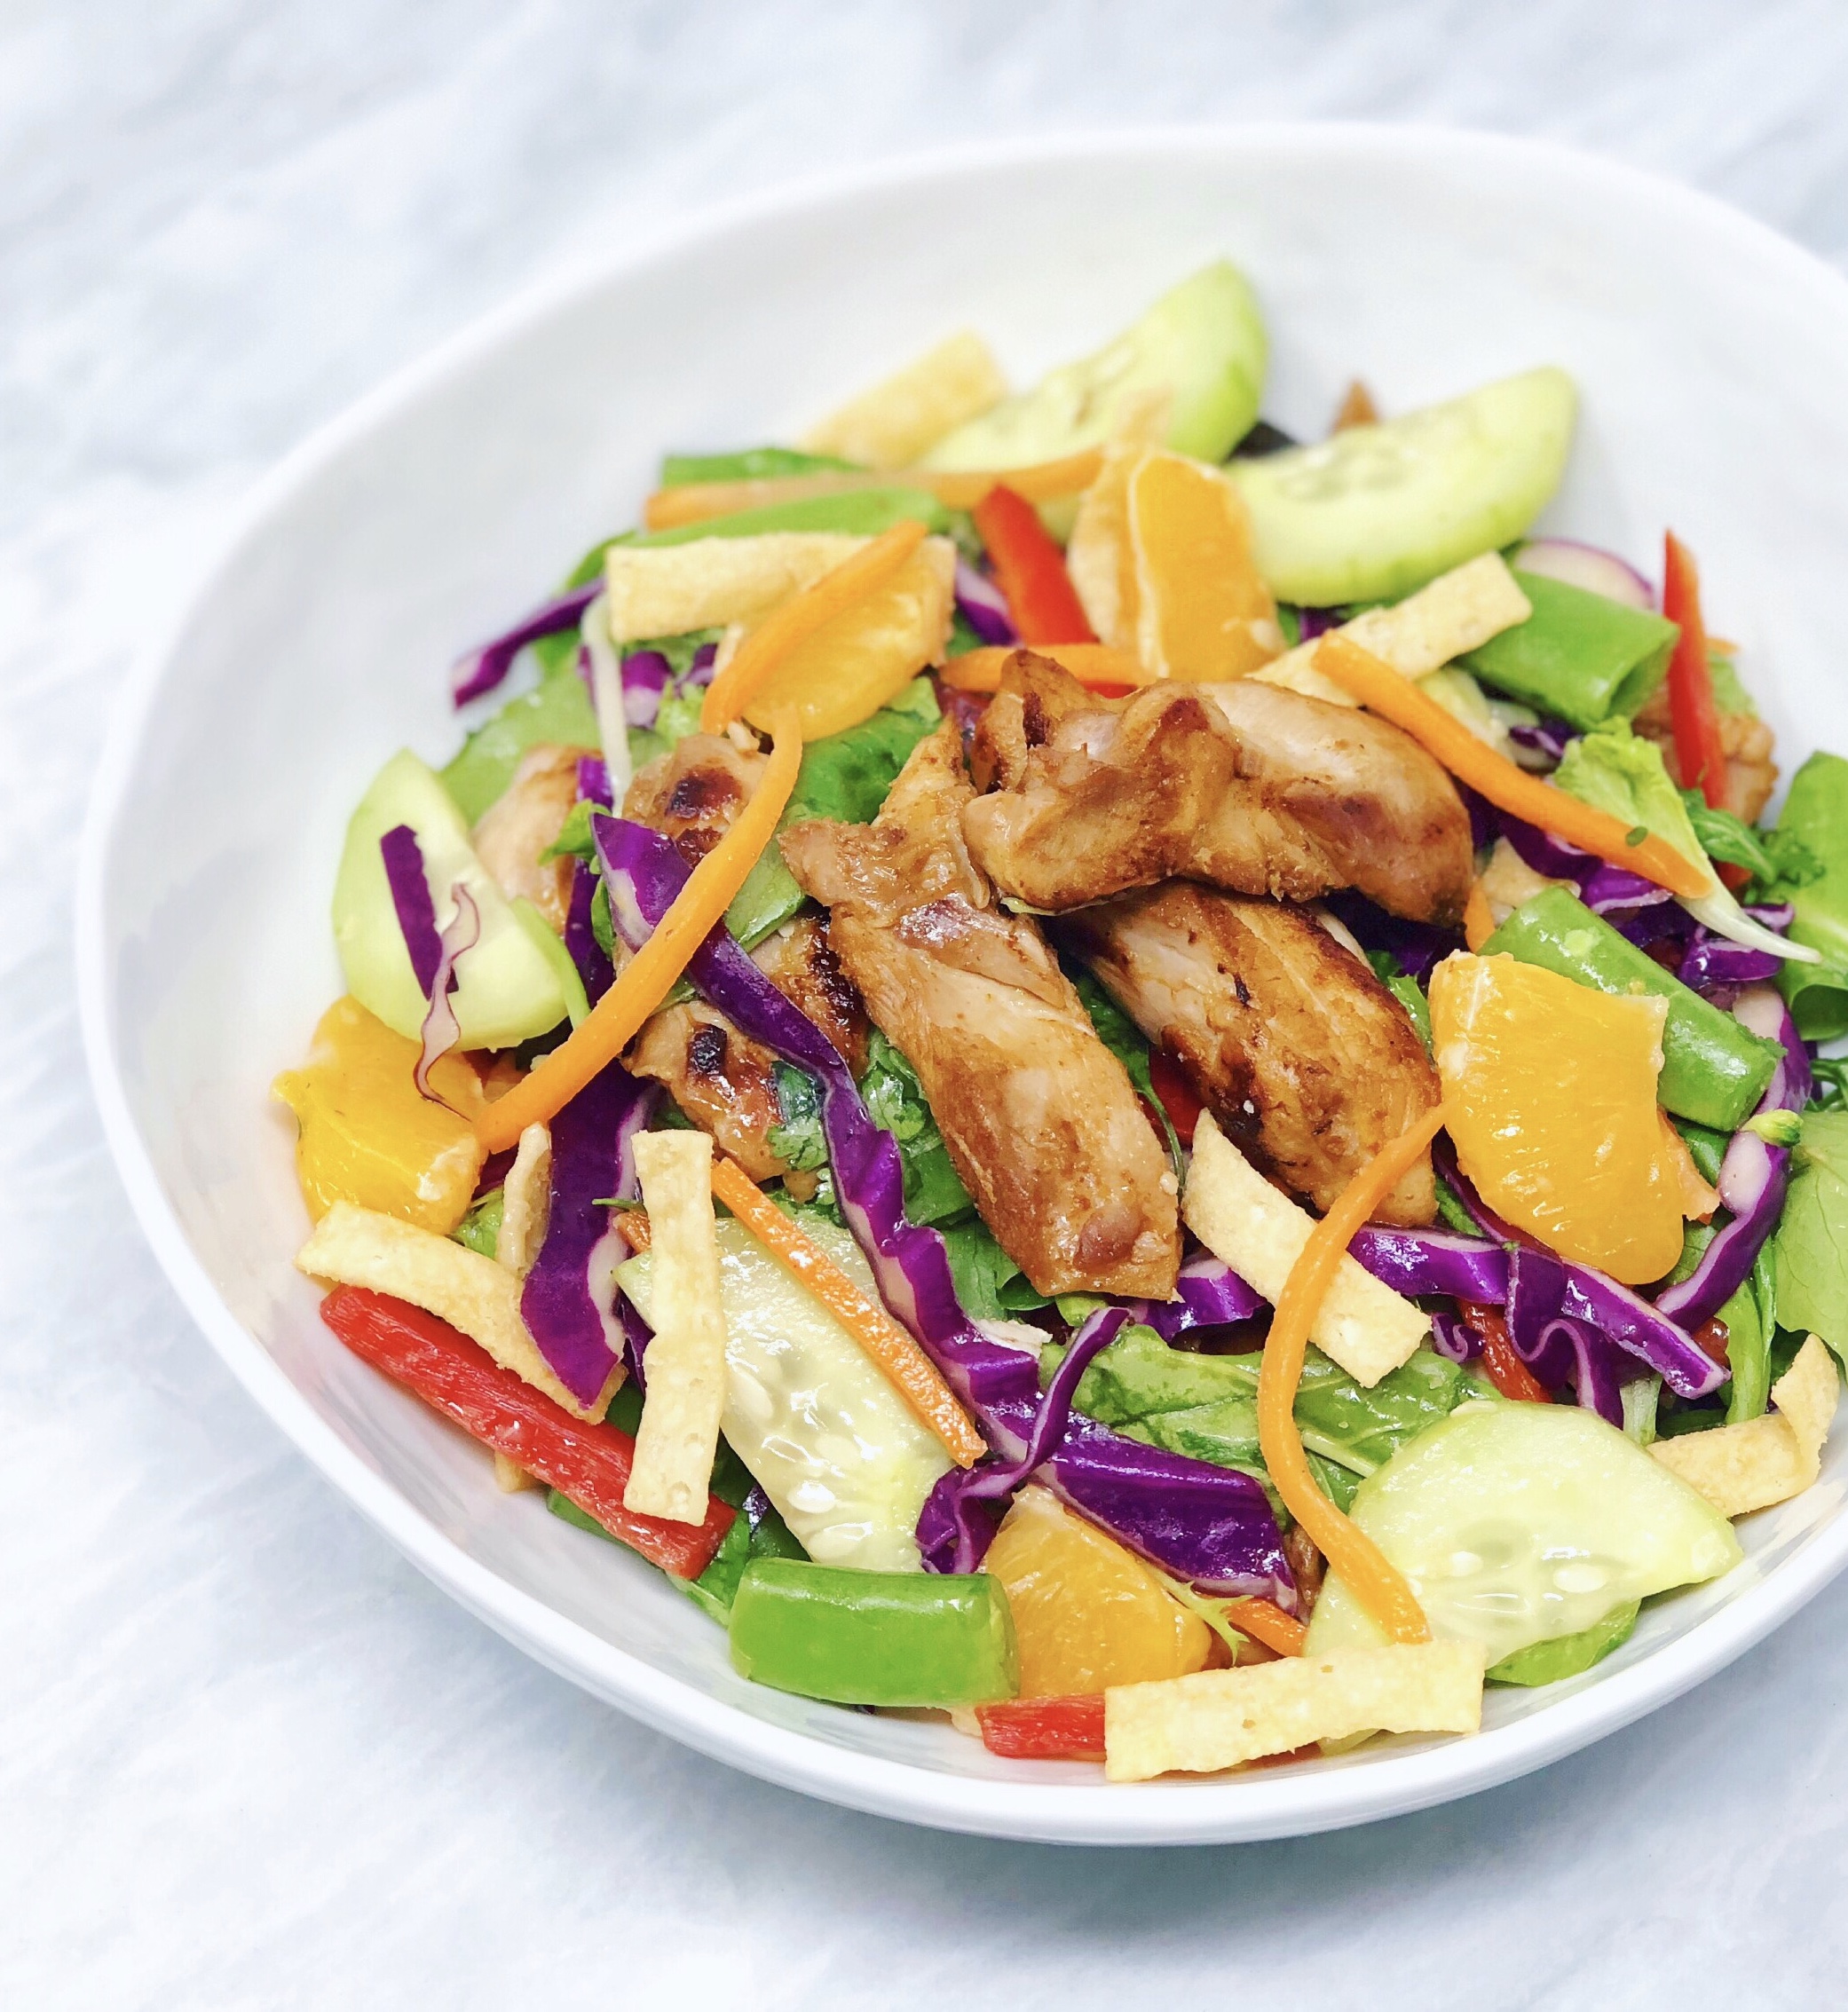 Dish of Asian-Style Chicken Salad